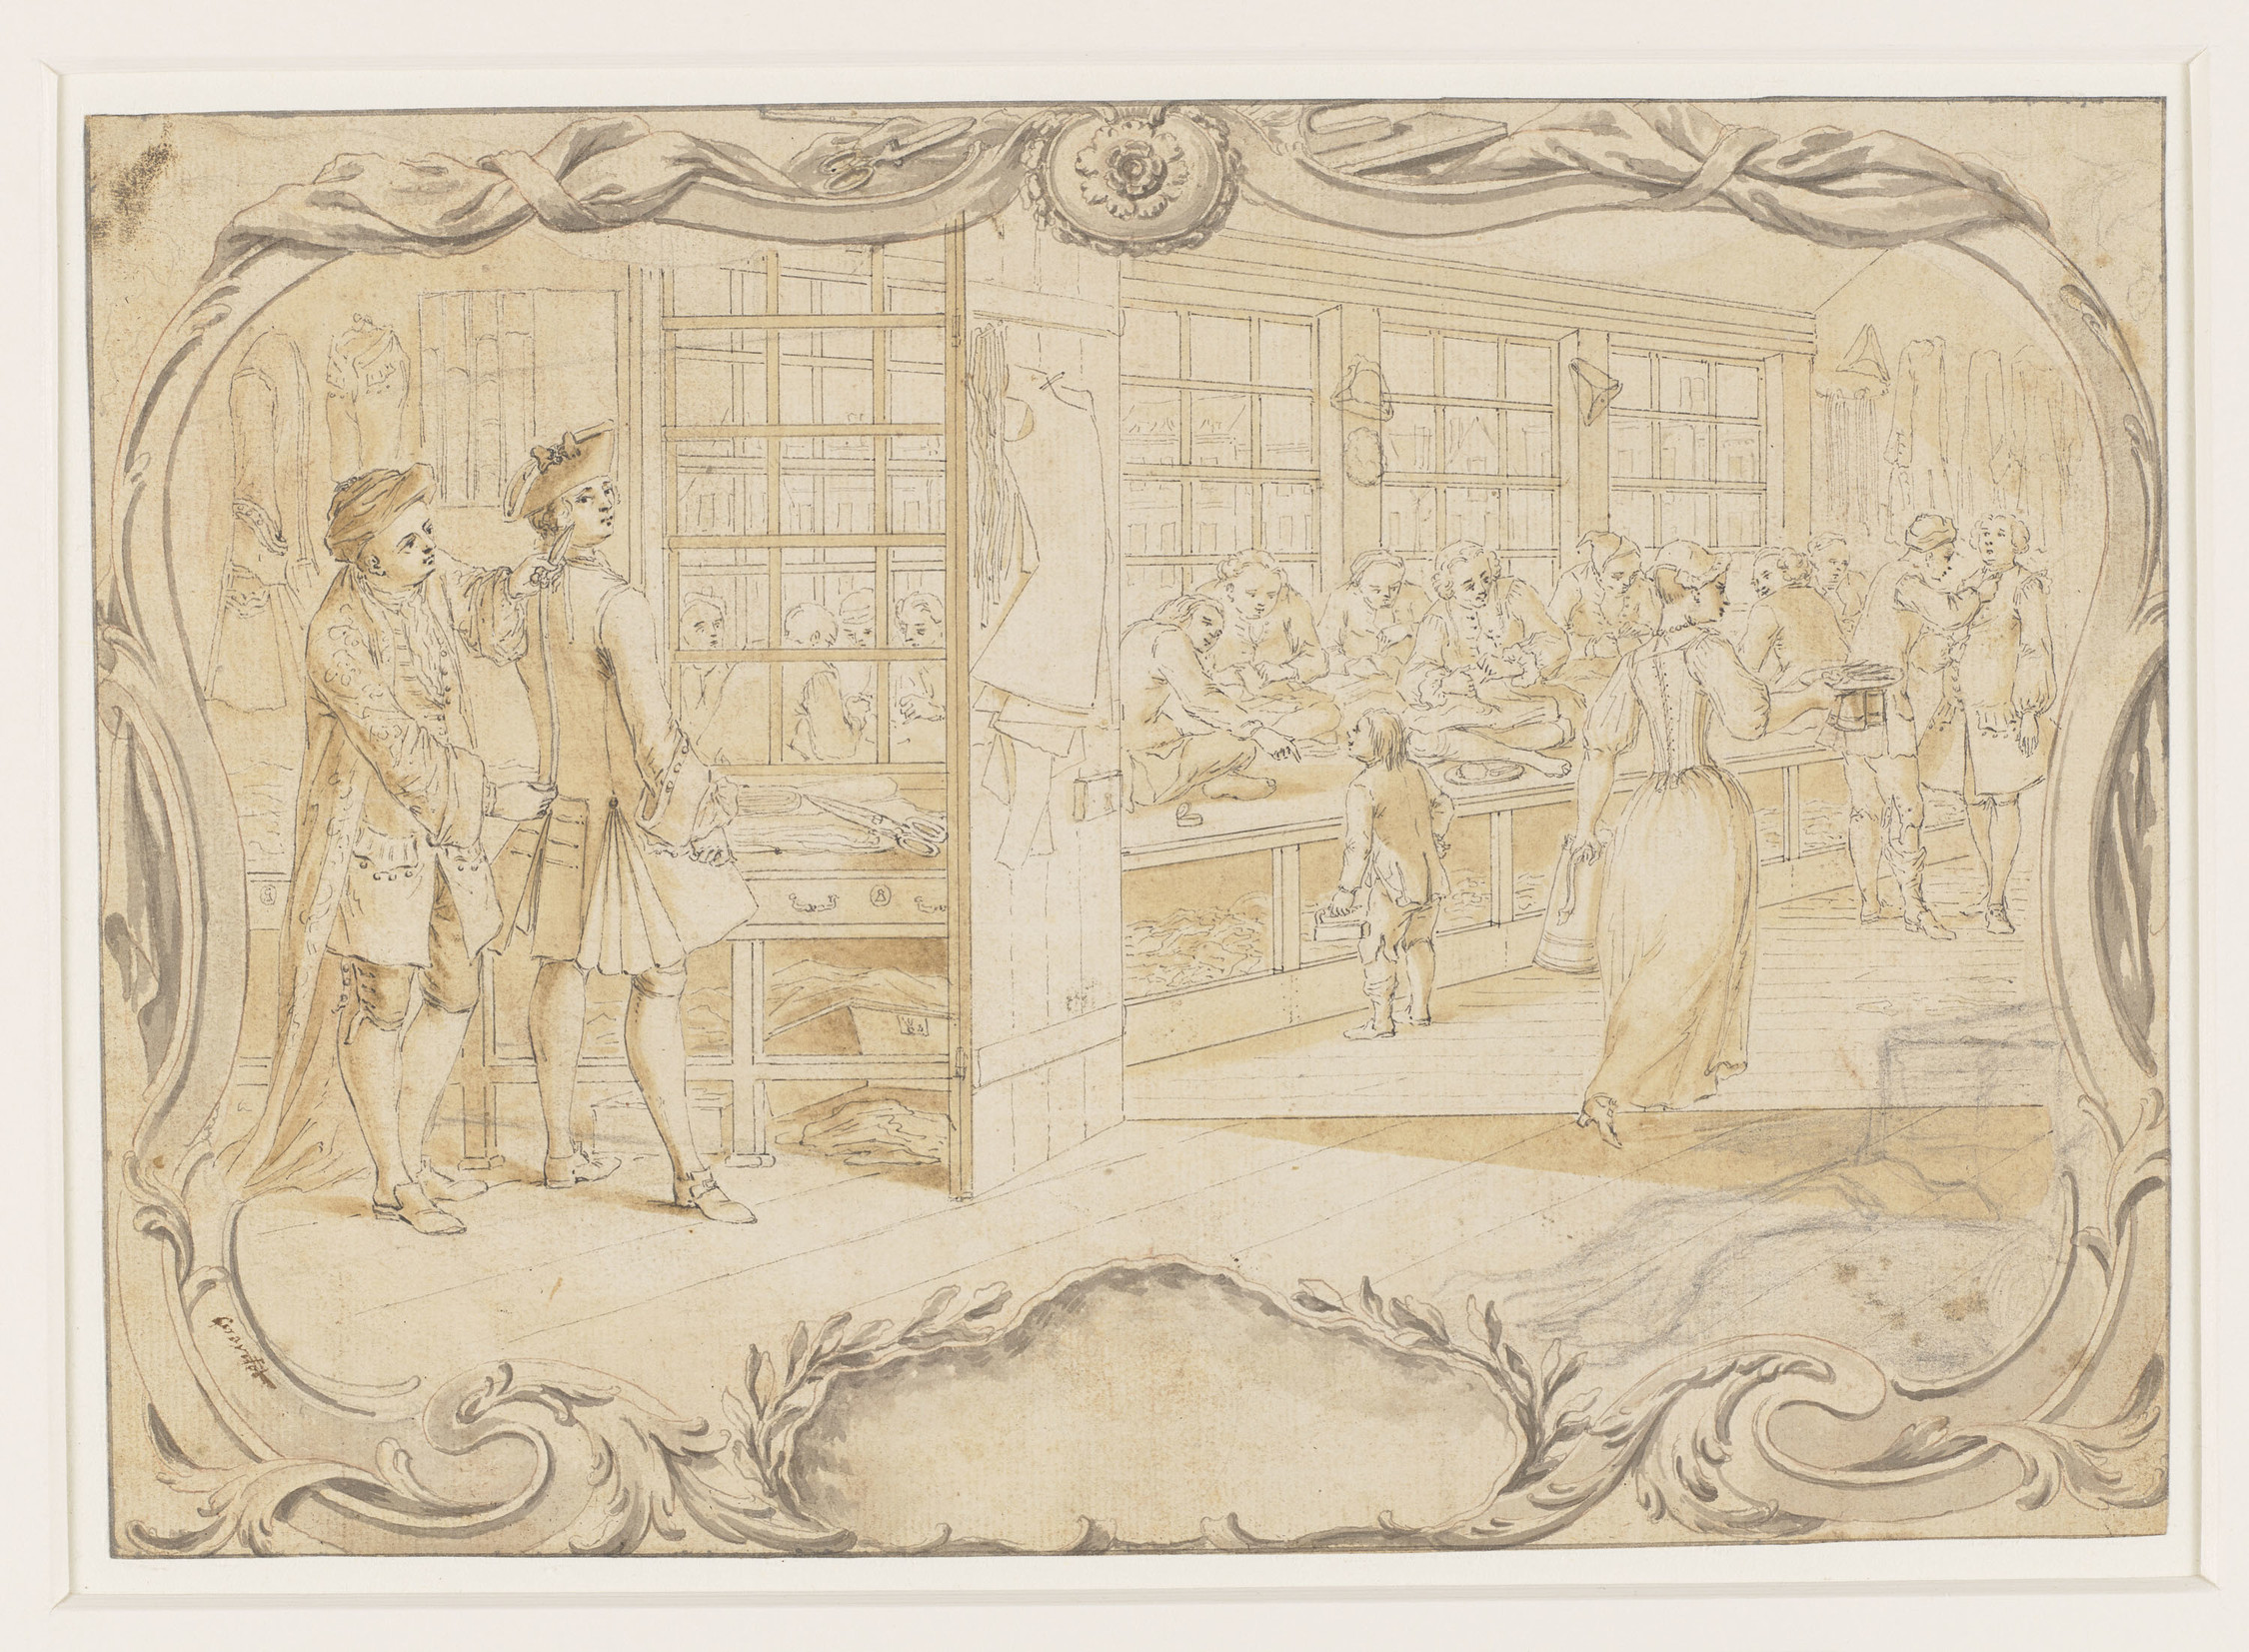 Drawing of a tailor's shop c. 1749 by Louis Philippe Boitard RCIN 913279